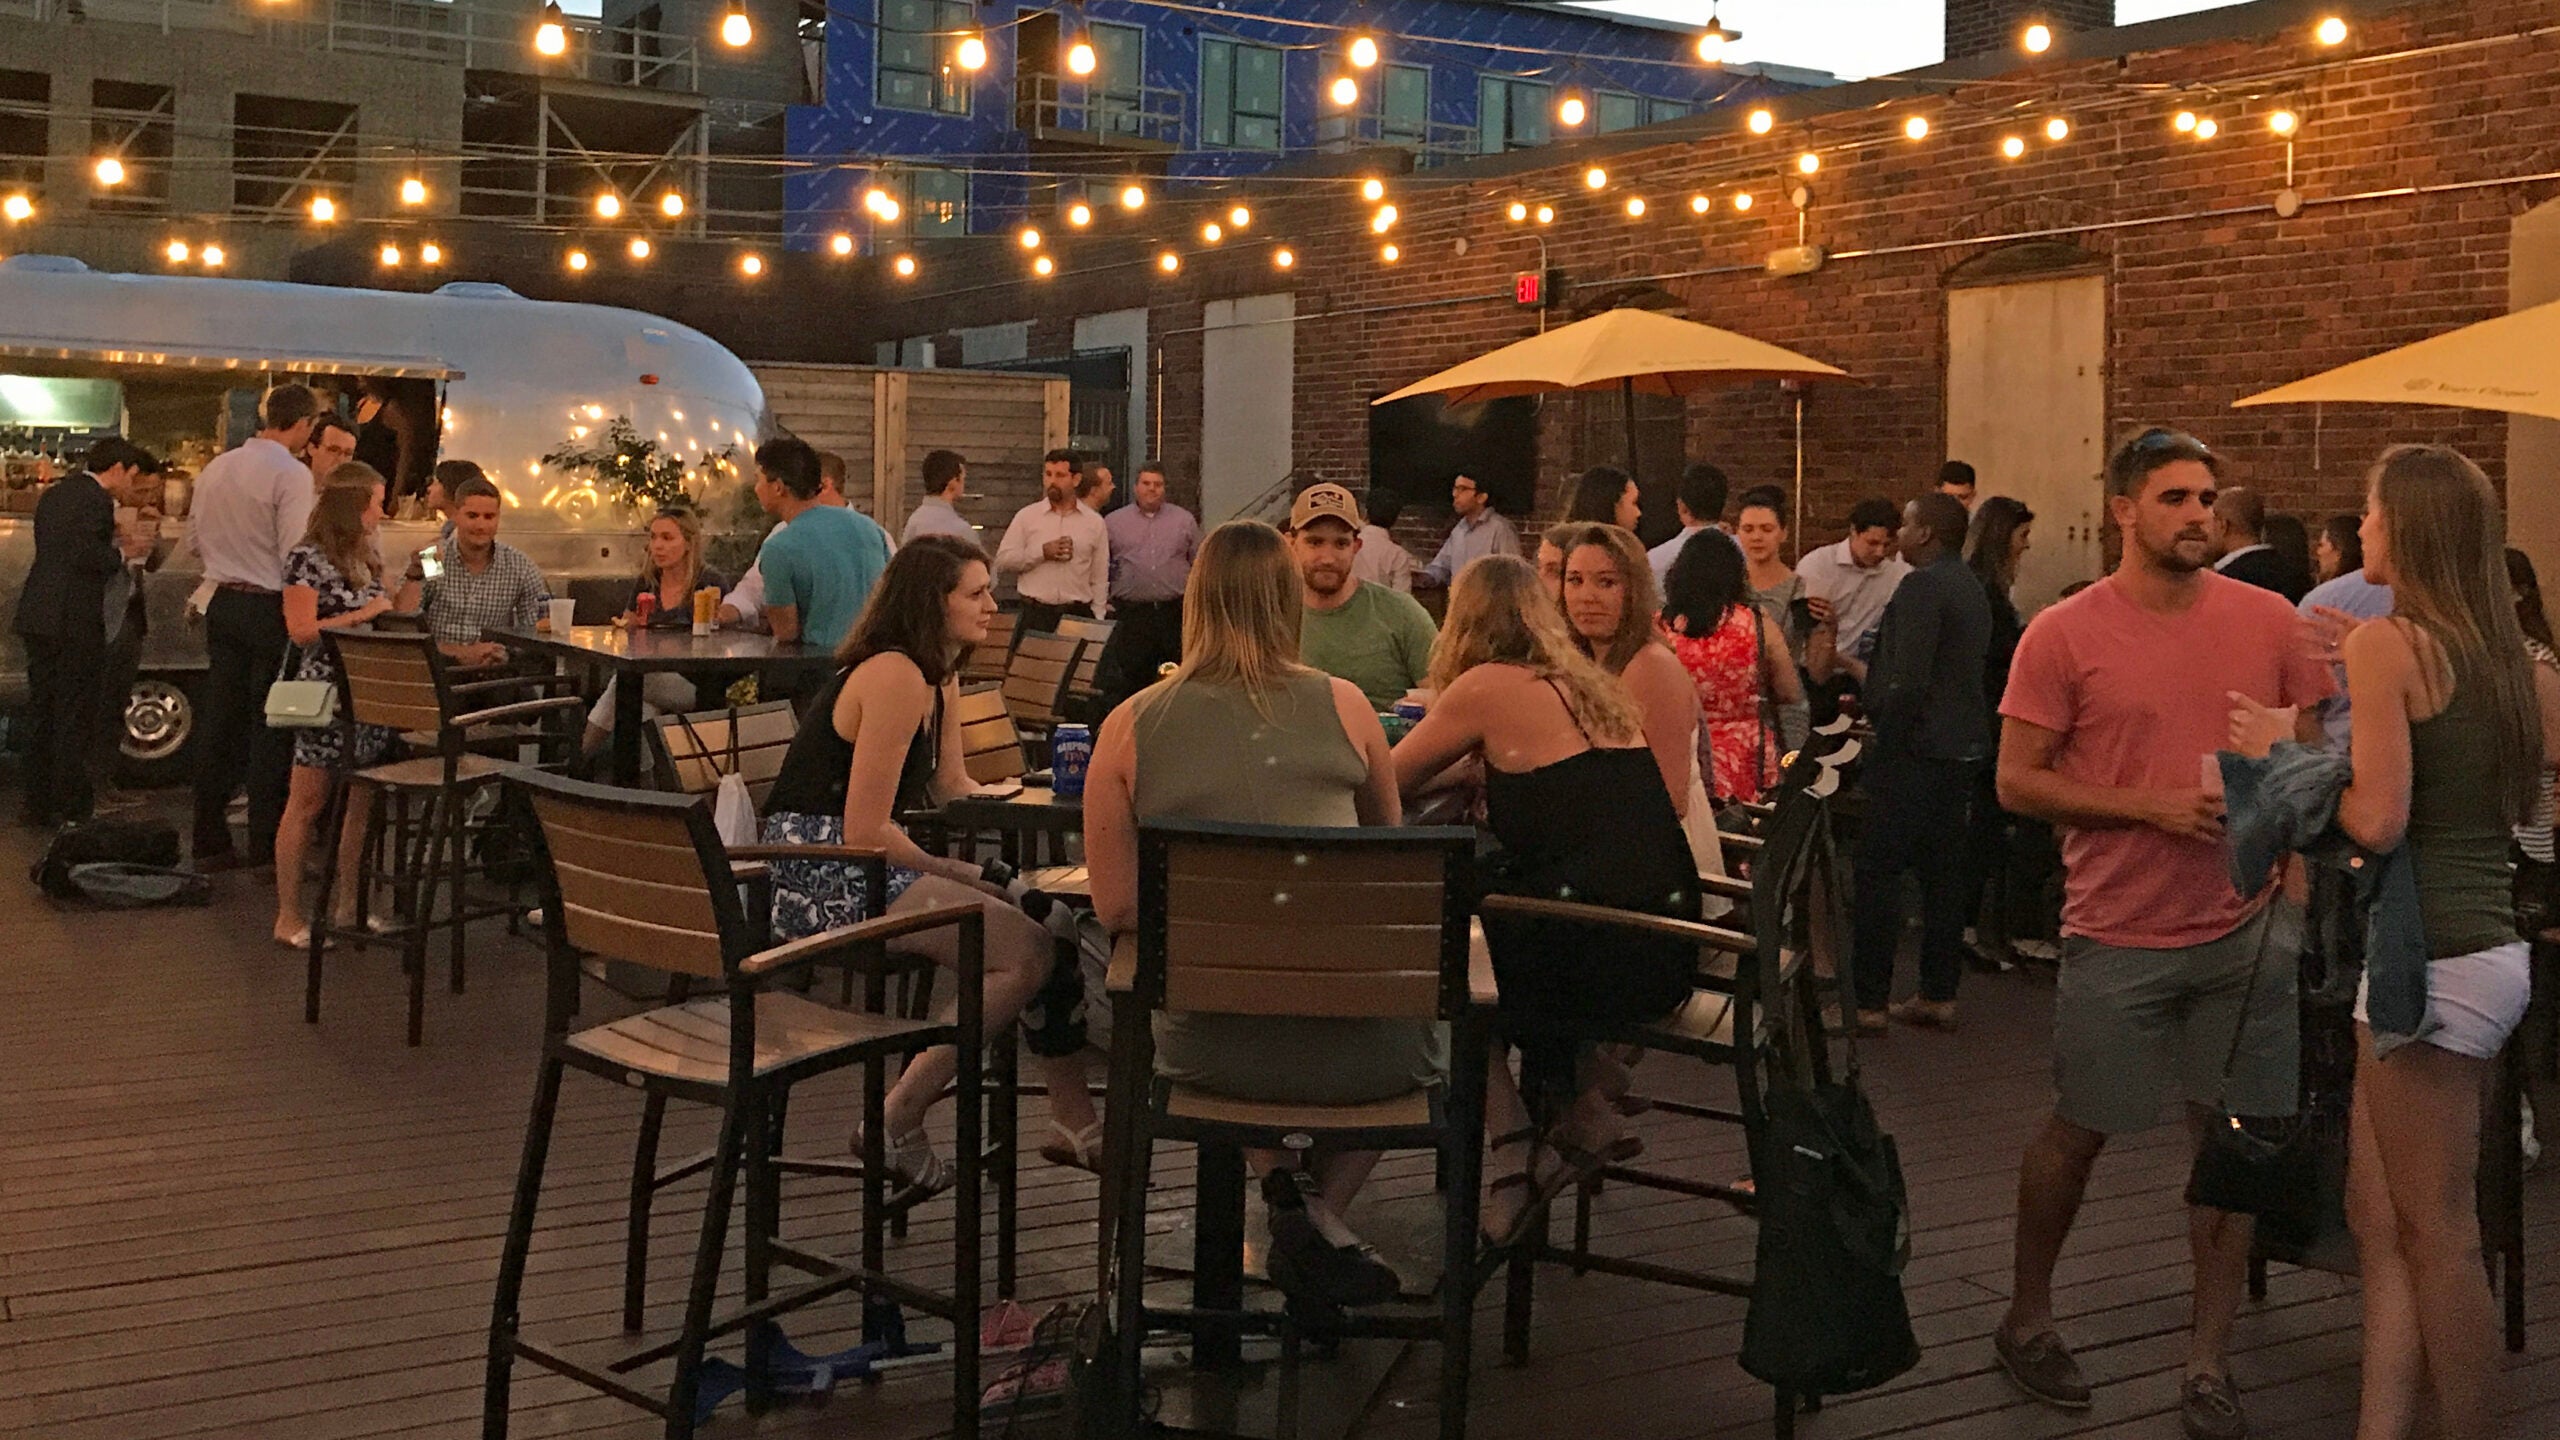 The patio at Coppersmith in South Boston